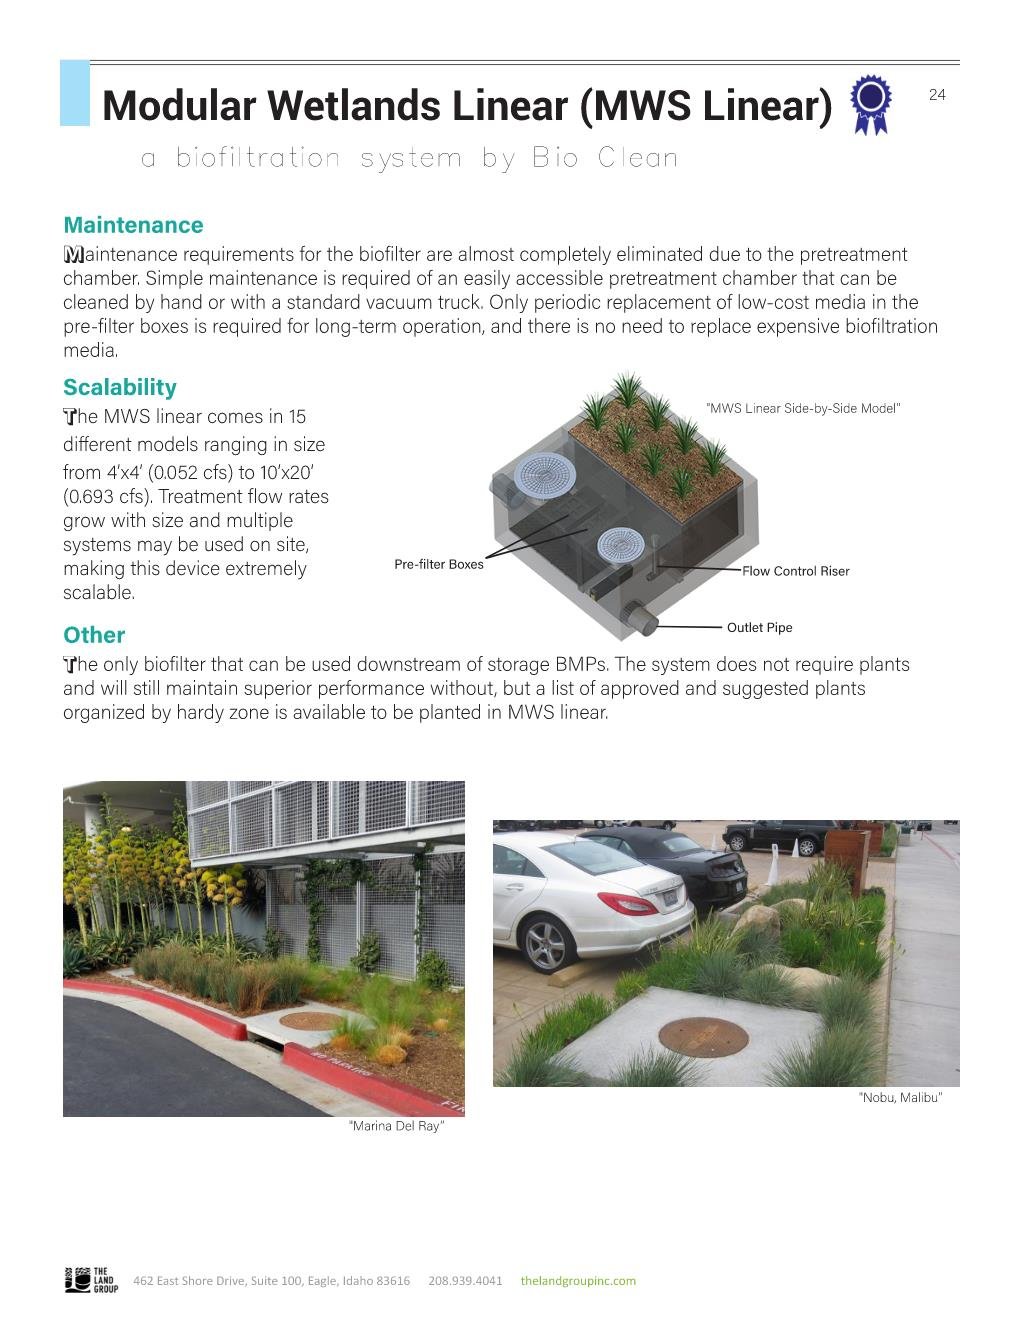 Stormwater Management Technology Comparison Toolkit Page 024.jpg